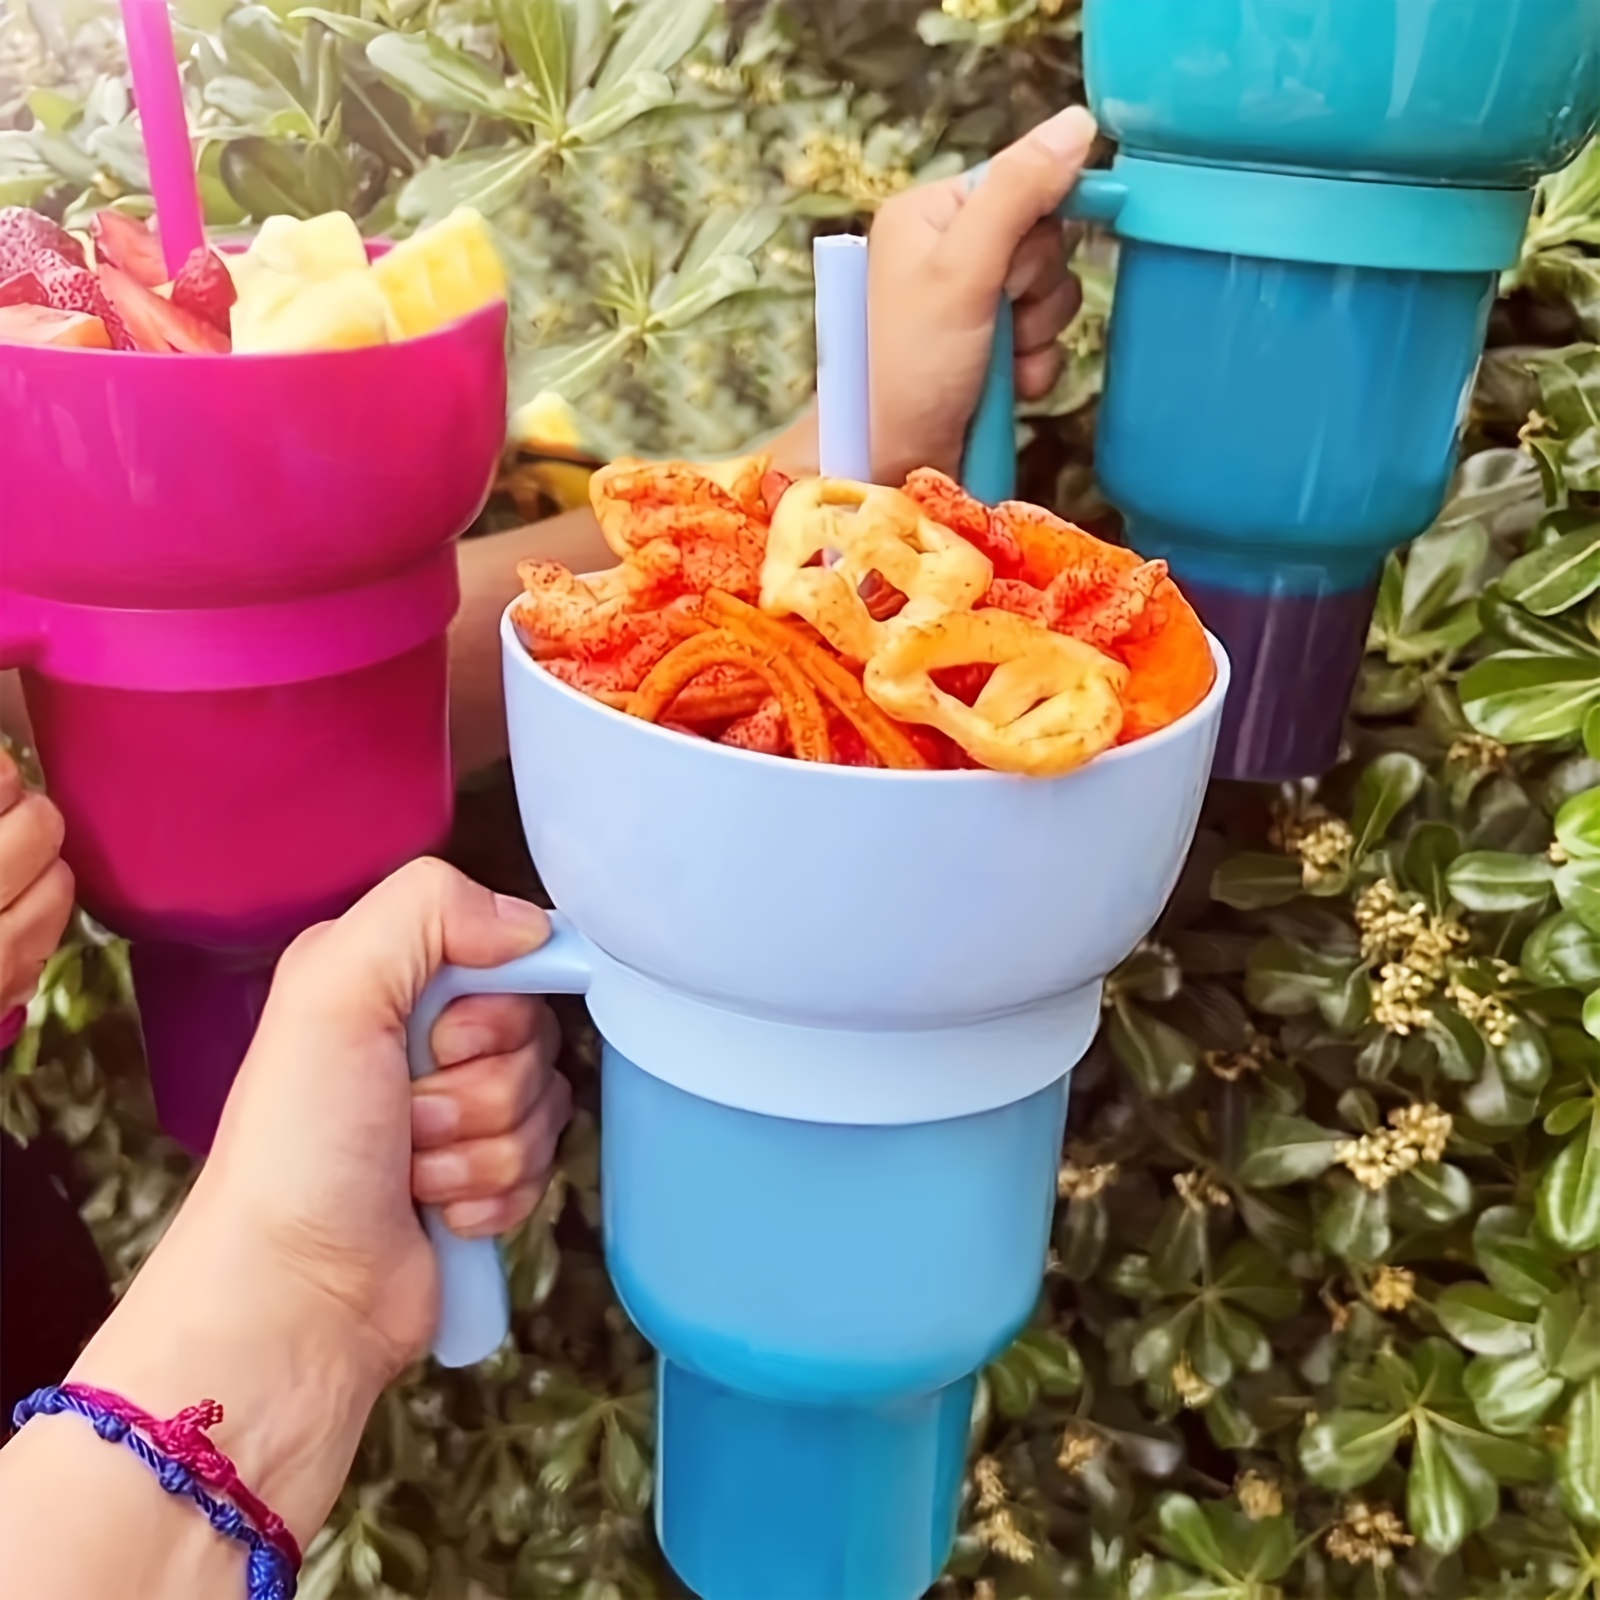  PASUKIT Cup Bowl Combo with Straw, 32oz Stadium Tumbler with  Snack Bowl, 2-in-1 Snack and Drink Cups with Straw, Travel Cup with Snack  Bowl on Top